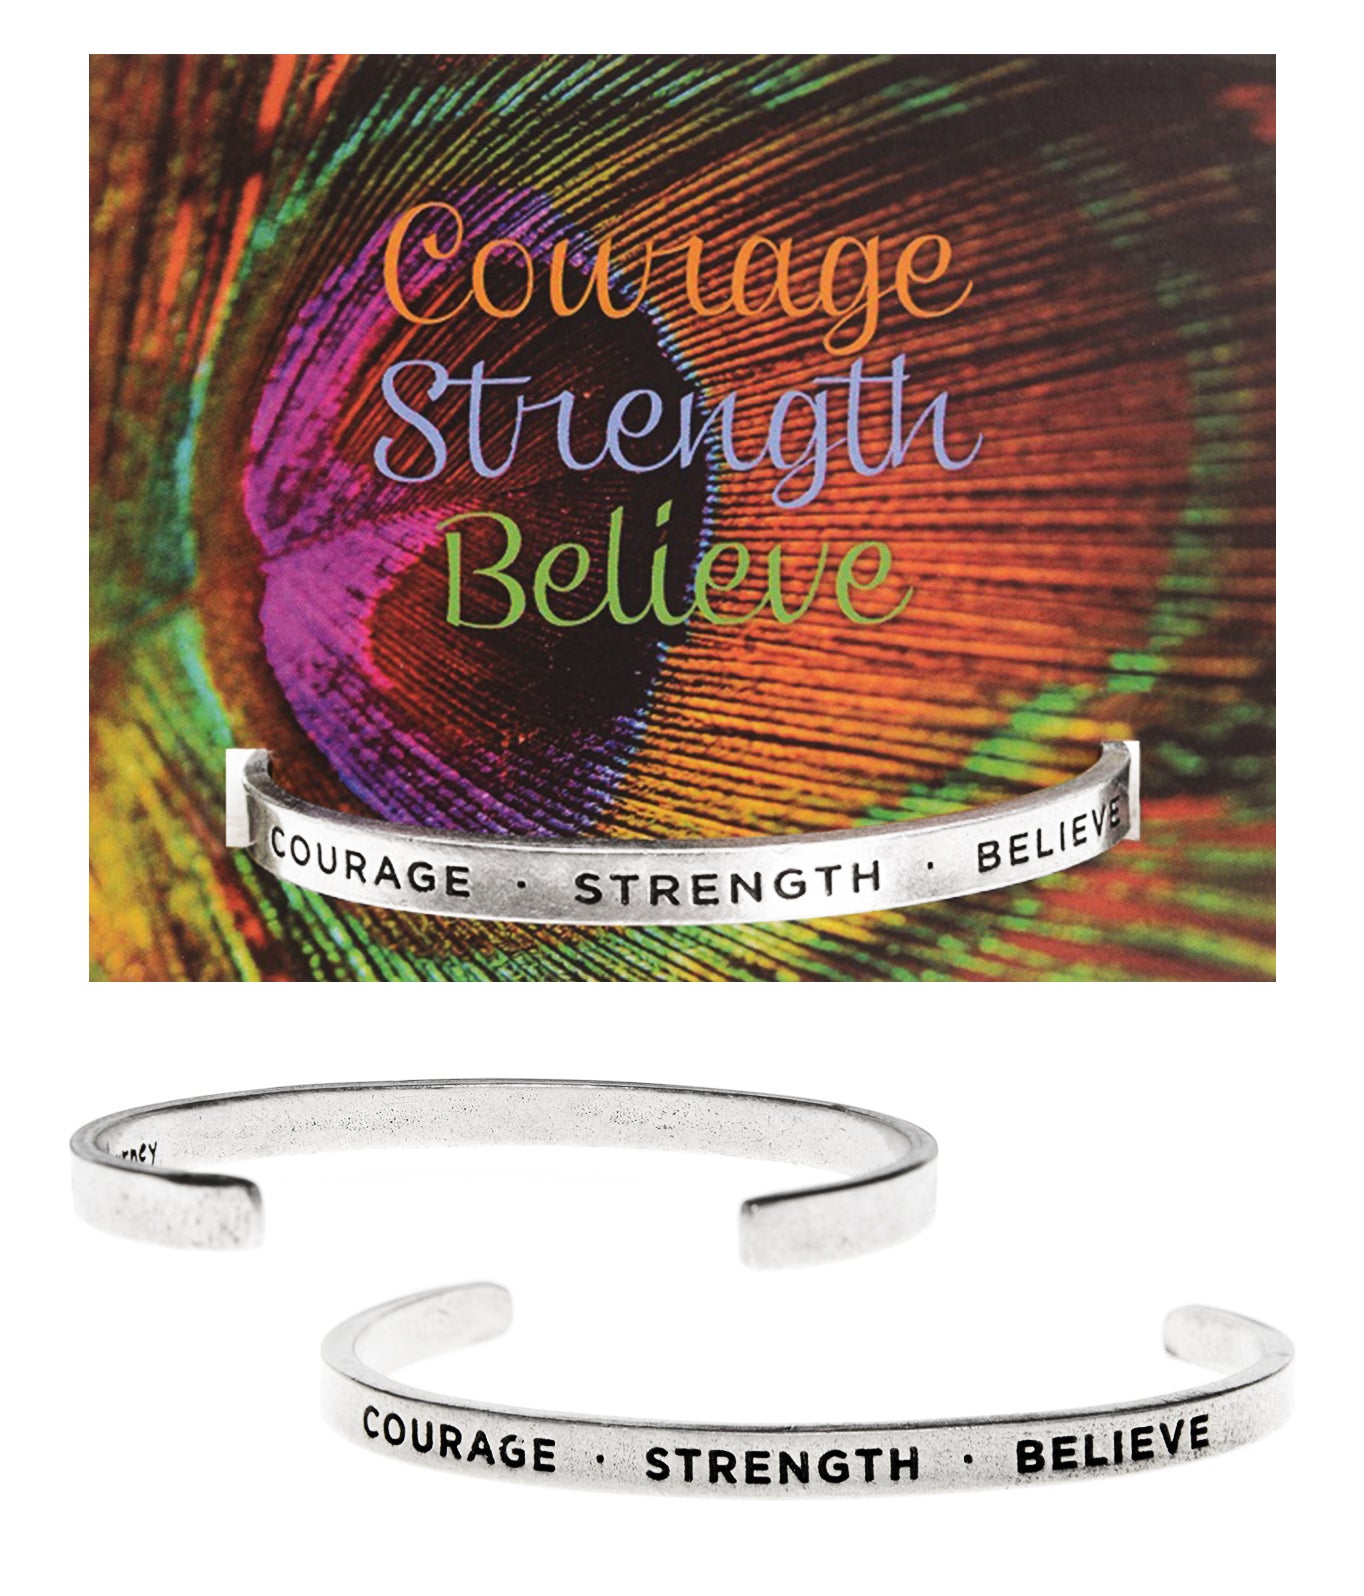 Courage-Strength-Believe Quotable Cuff Bracelet with backer card